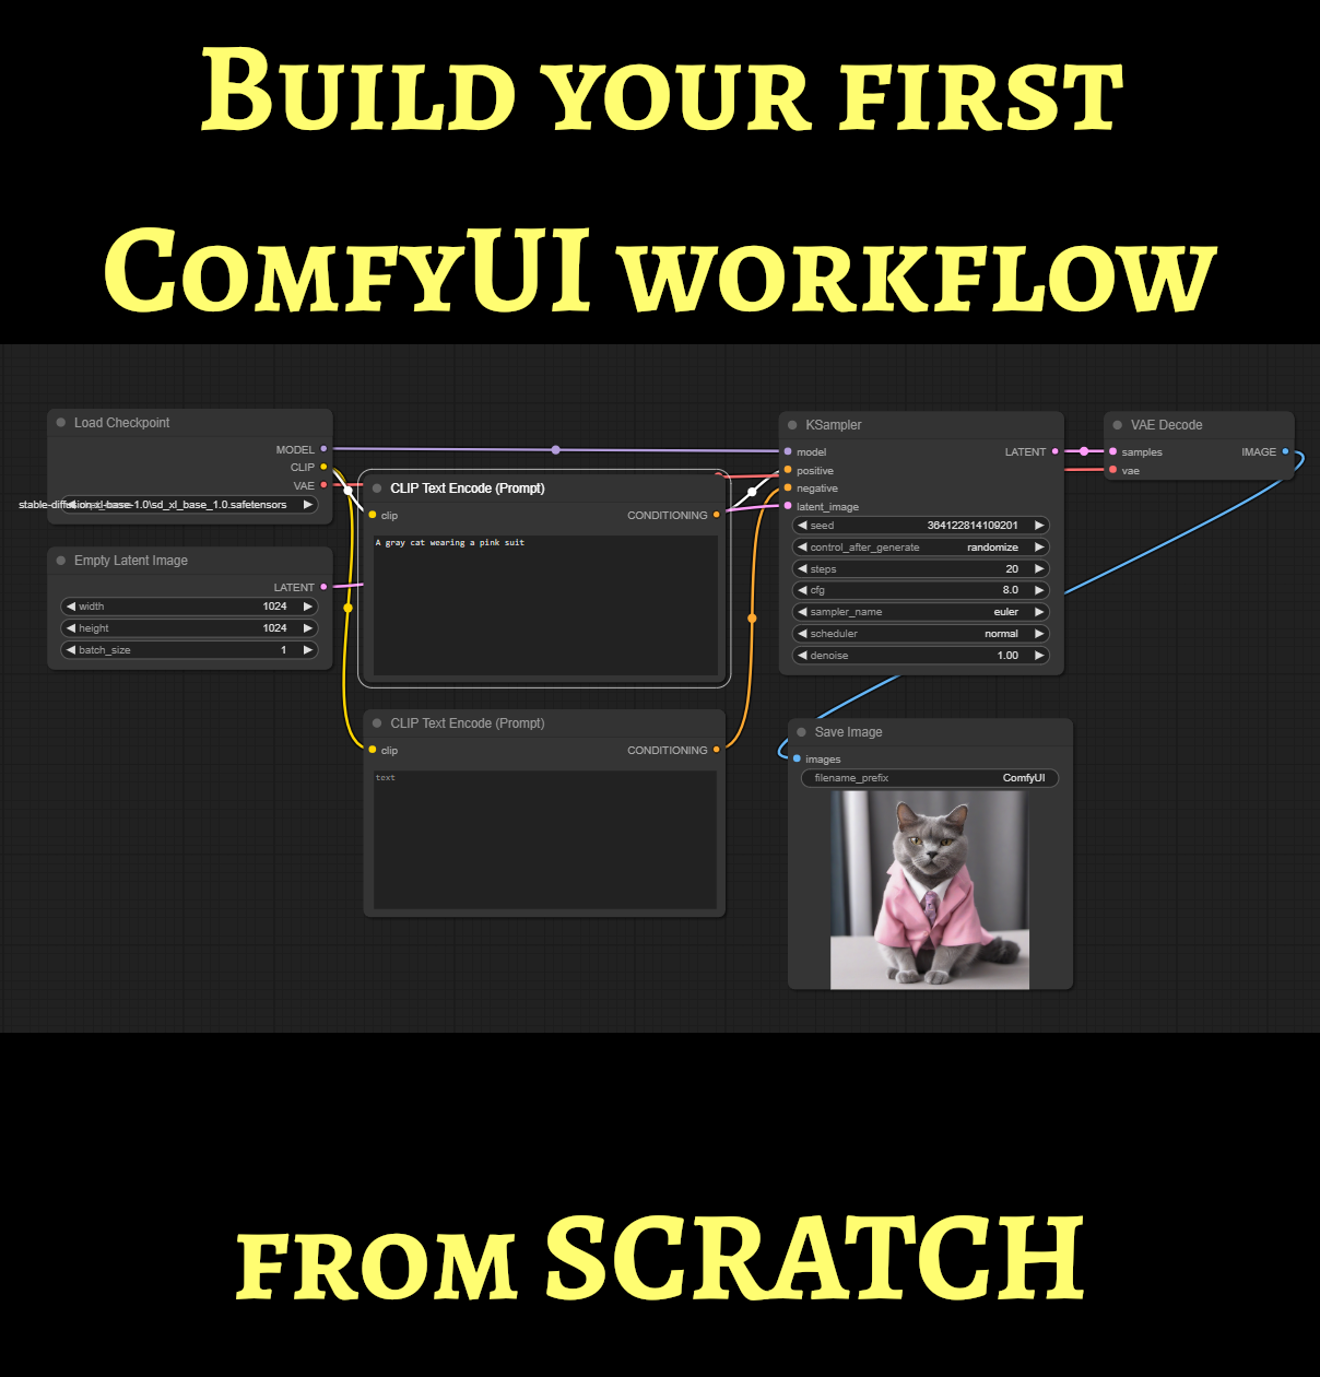 Building a Workflow from Scratch: A ComfyUI Walkthrough for Beginners